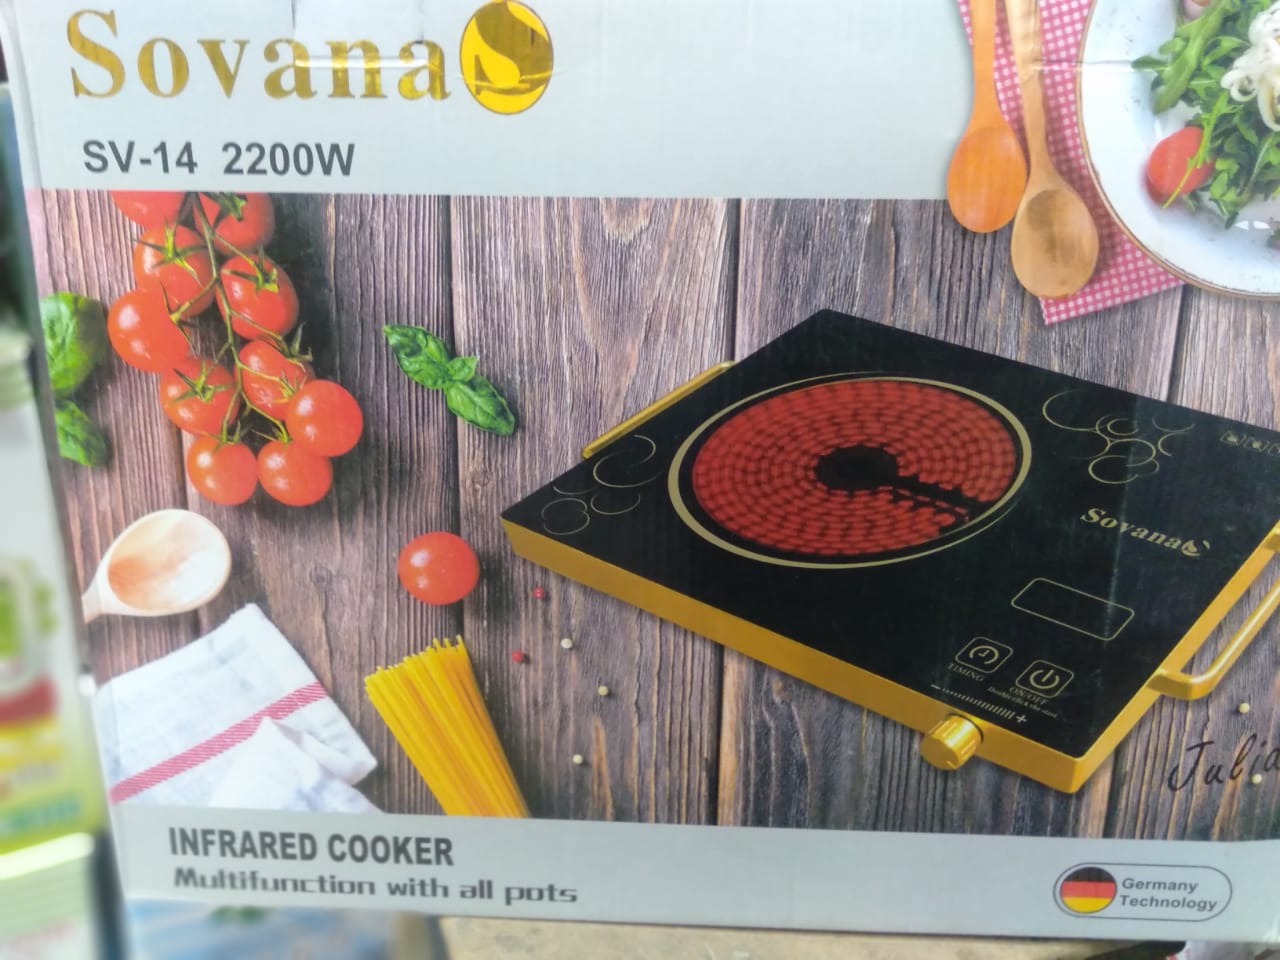 Sovana Sv-19 Cooker Automatic digital infrared cooker - Hot Plate High Quality Electric Stove Easy To Use Kitchen Chula Electric - Home Appliances Kitchen Stove Electric Hot Plate Importen Portable - Electric Stove With Touch Control